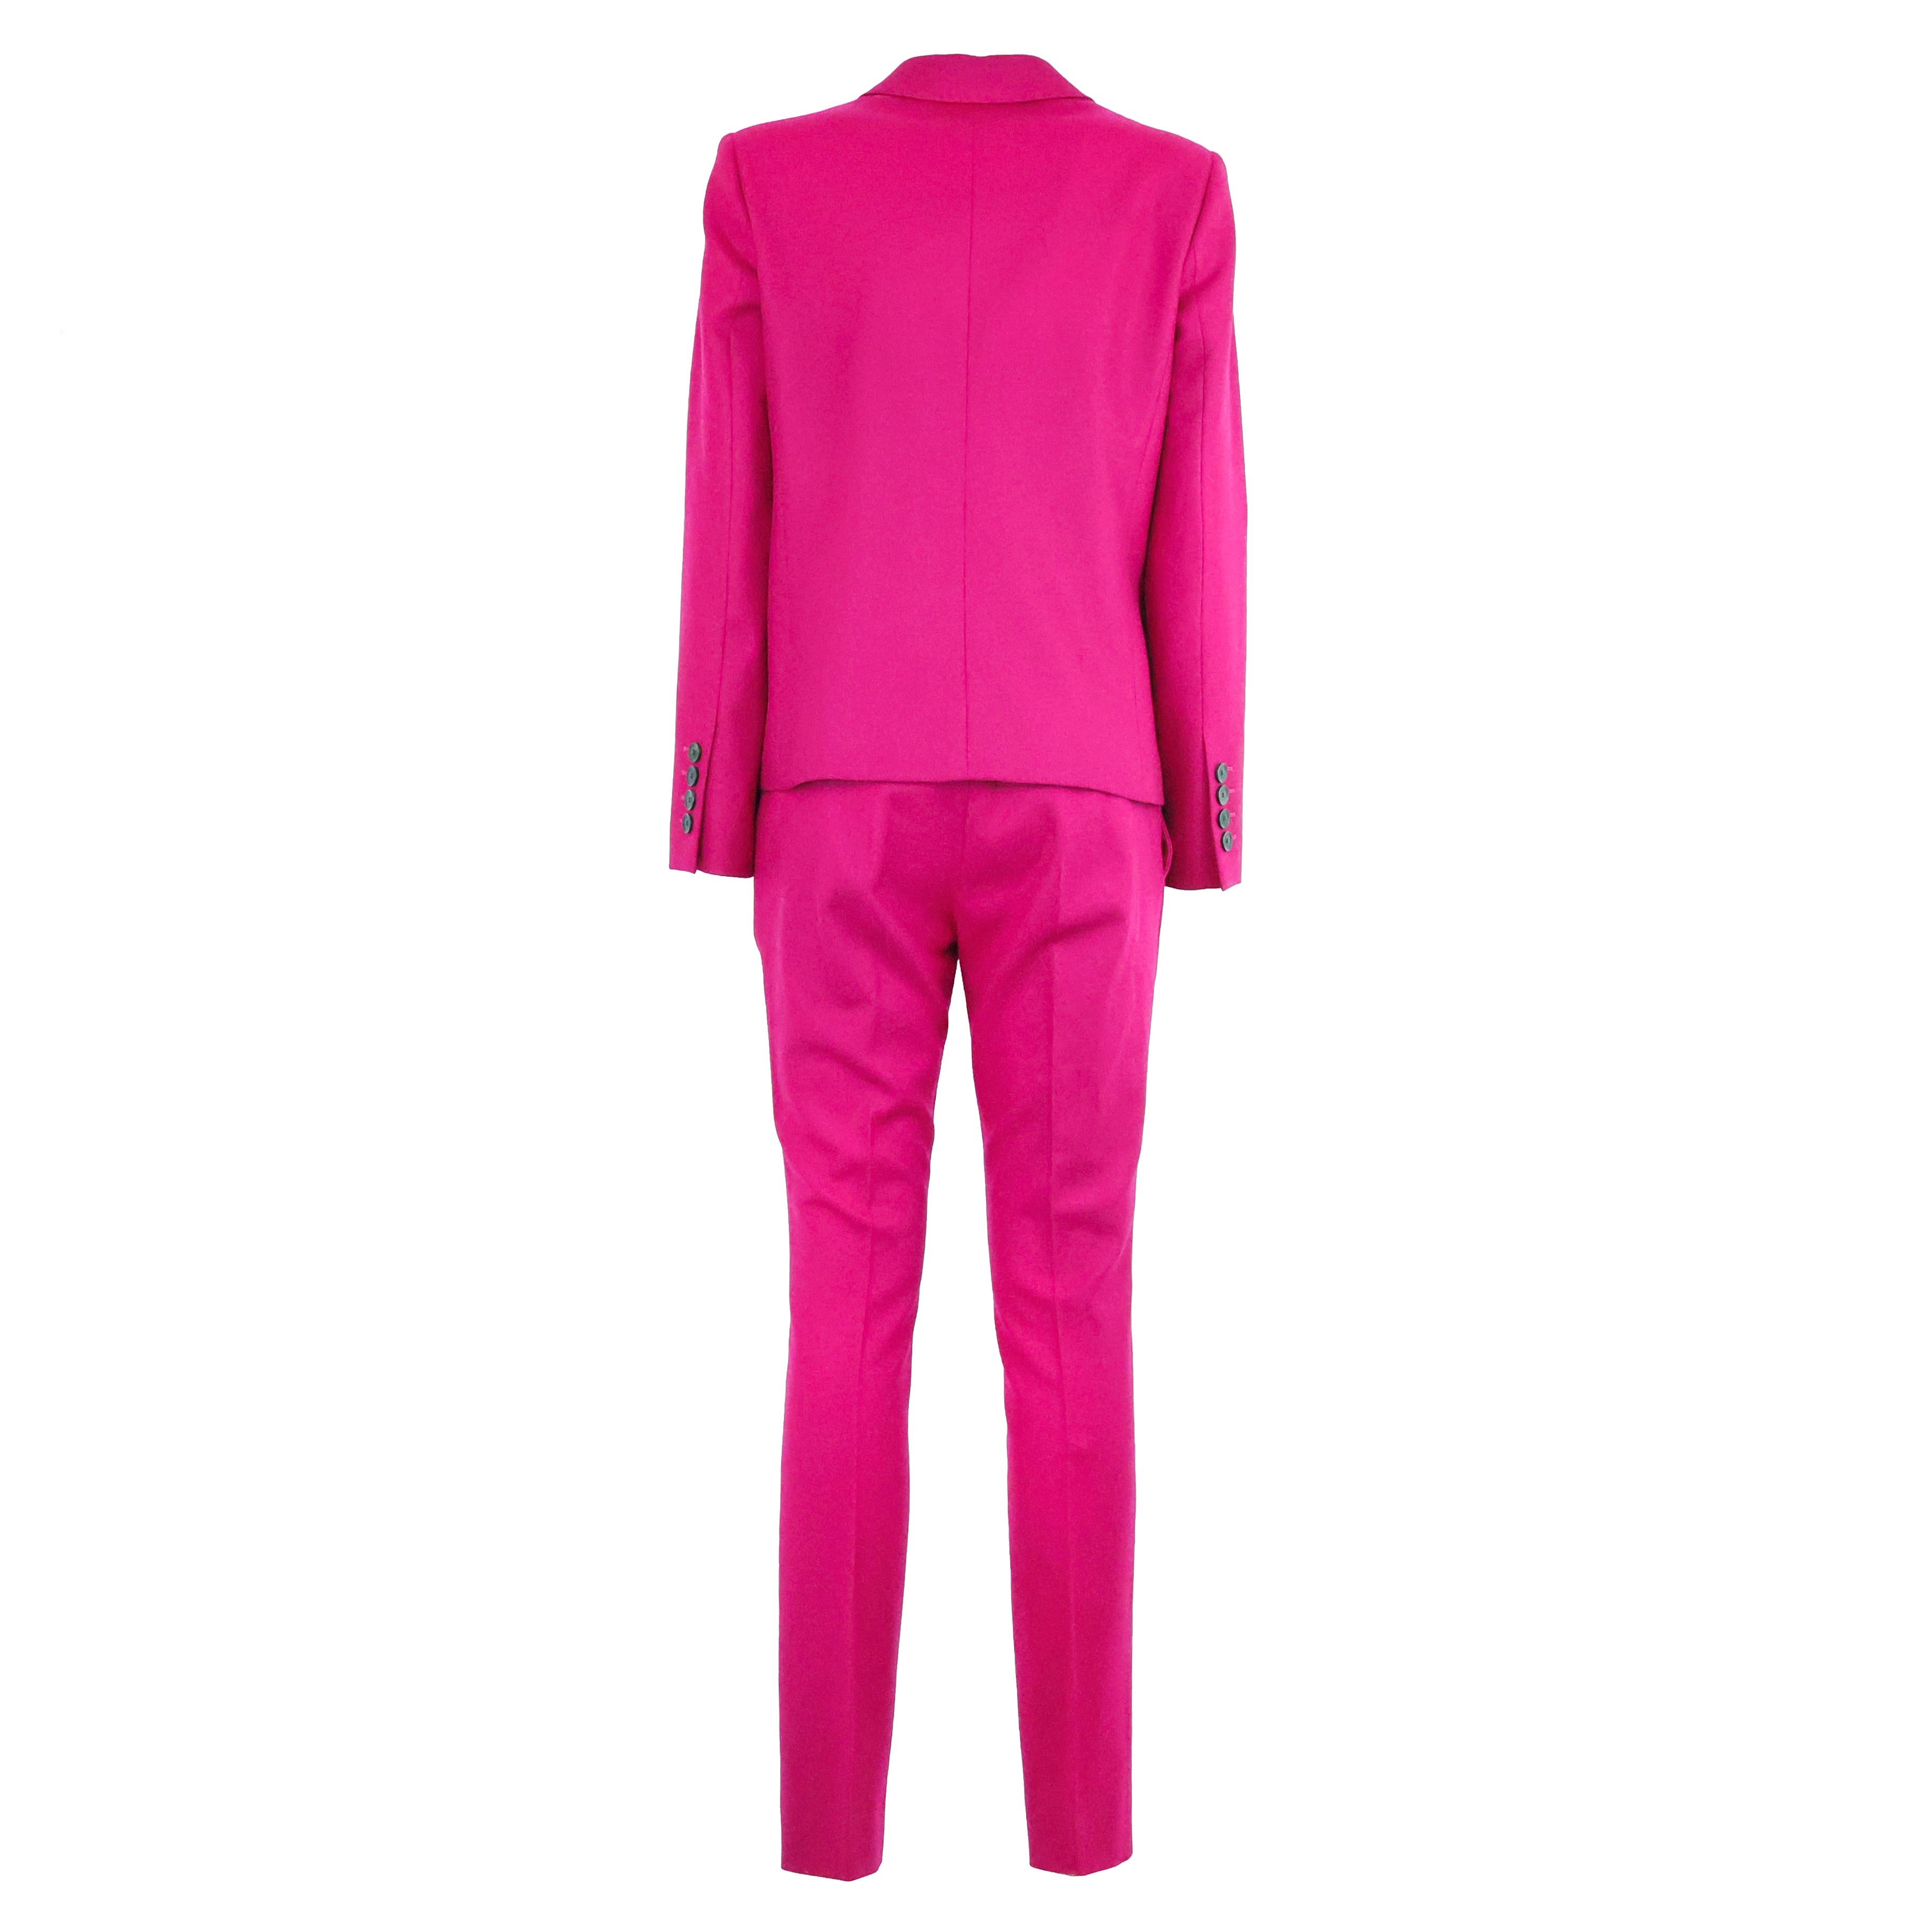 Gucci Tailleur in wool color fucsia, silk linning Jacket size: 42IT, Pants size: 40IT.

Condition:
Really good.

Packing/accessories:
Hanger.